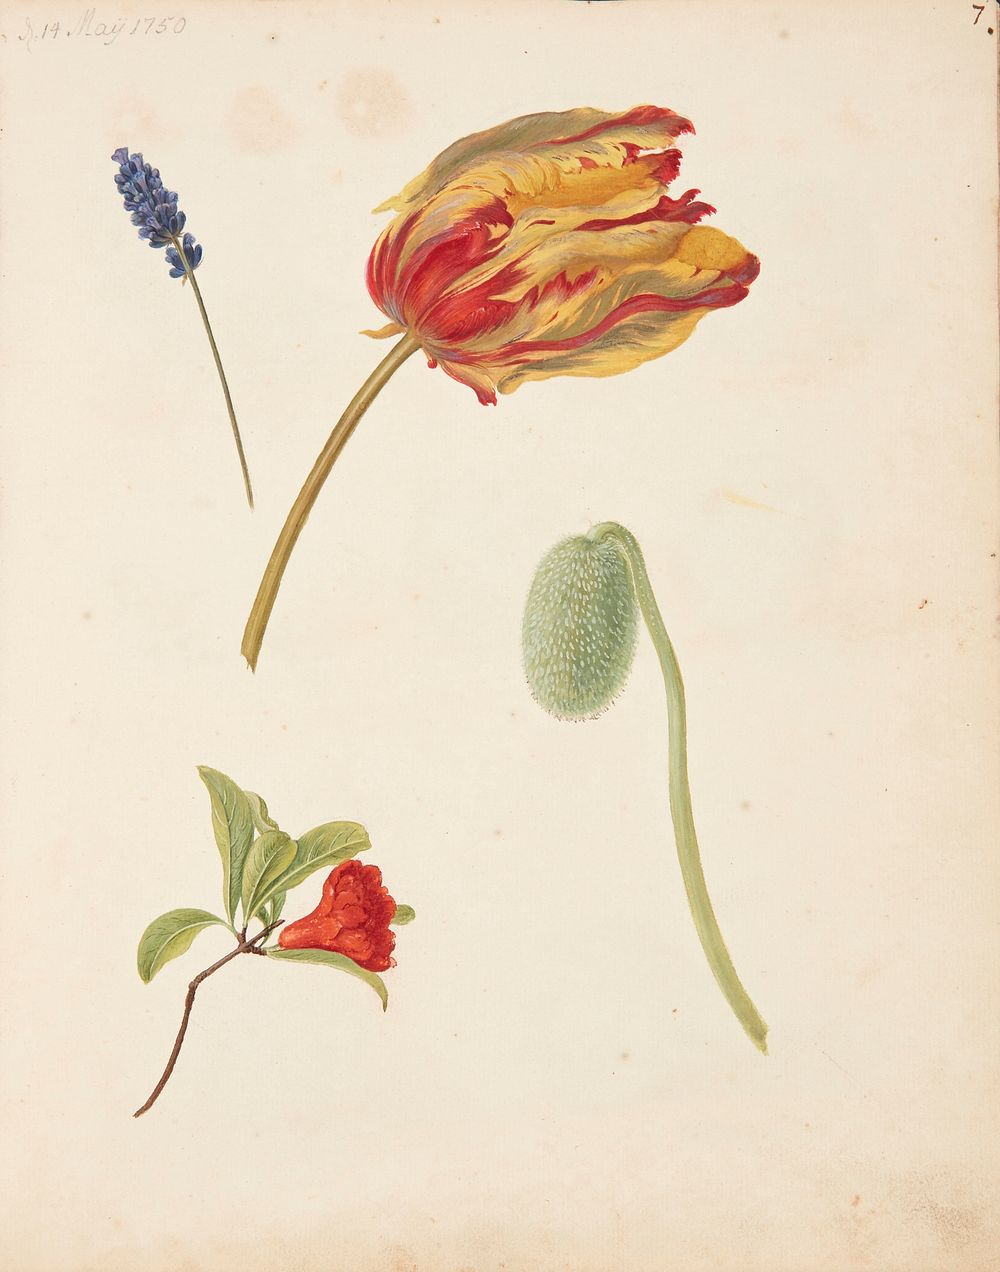 Study of tulip and other flowers by Johanna Fosie